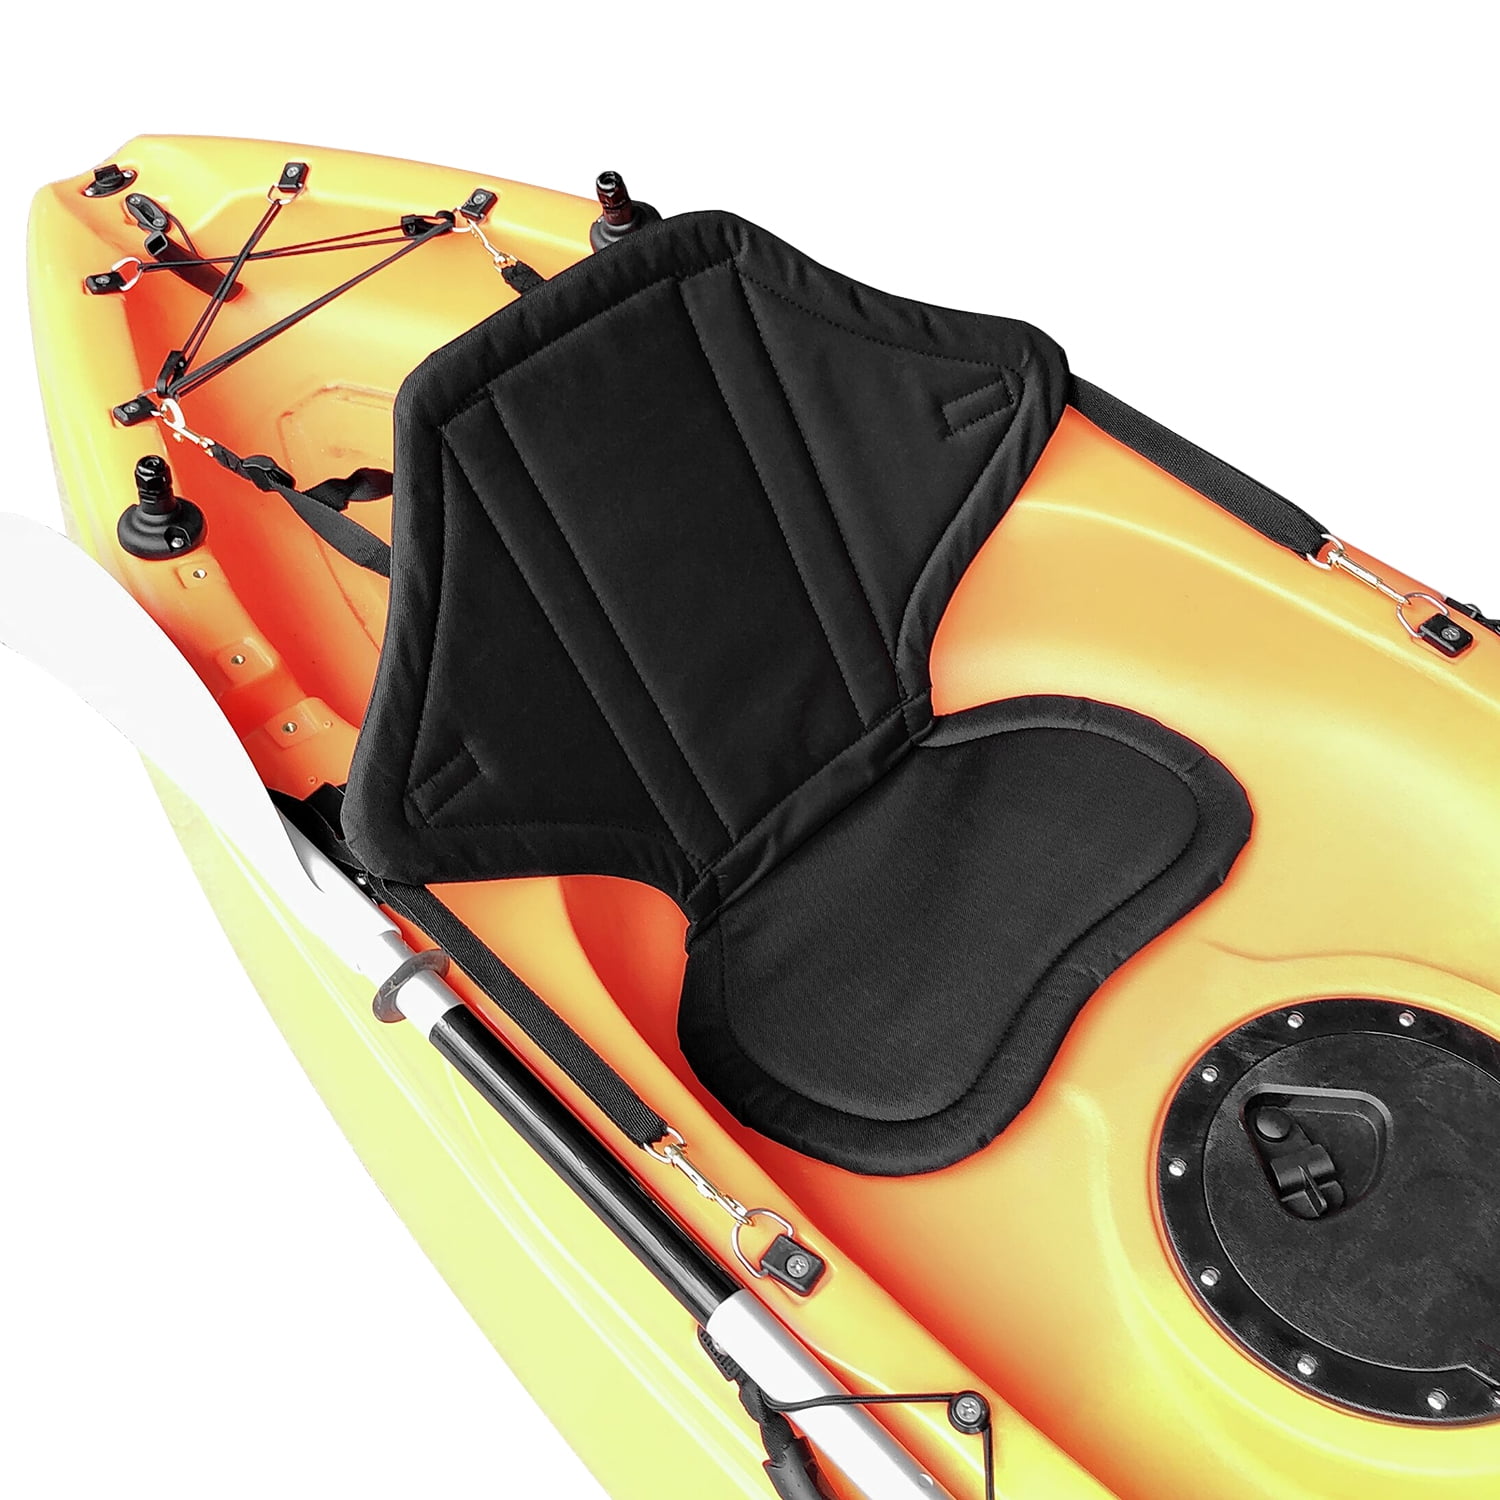 Lixada Water Repellent Children Kayak Seat with Back Support Kids High Back Canoe Seat Boats Cushioned Seat Pad for Outdoor Watersports 